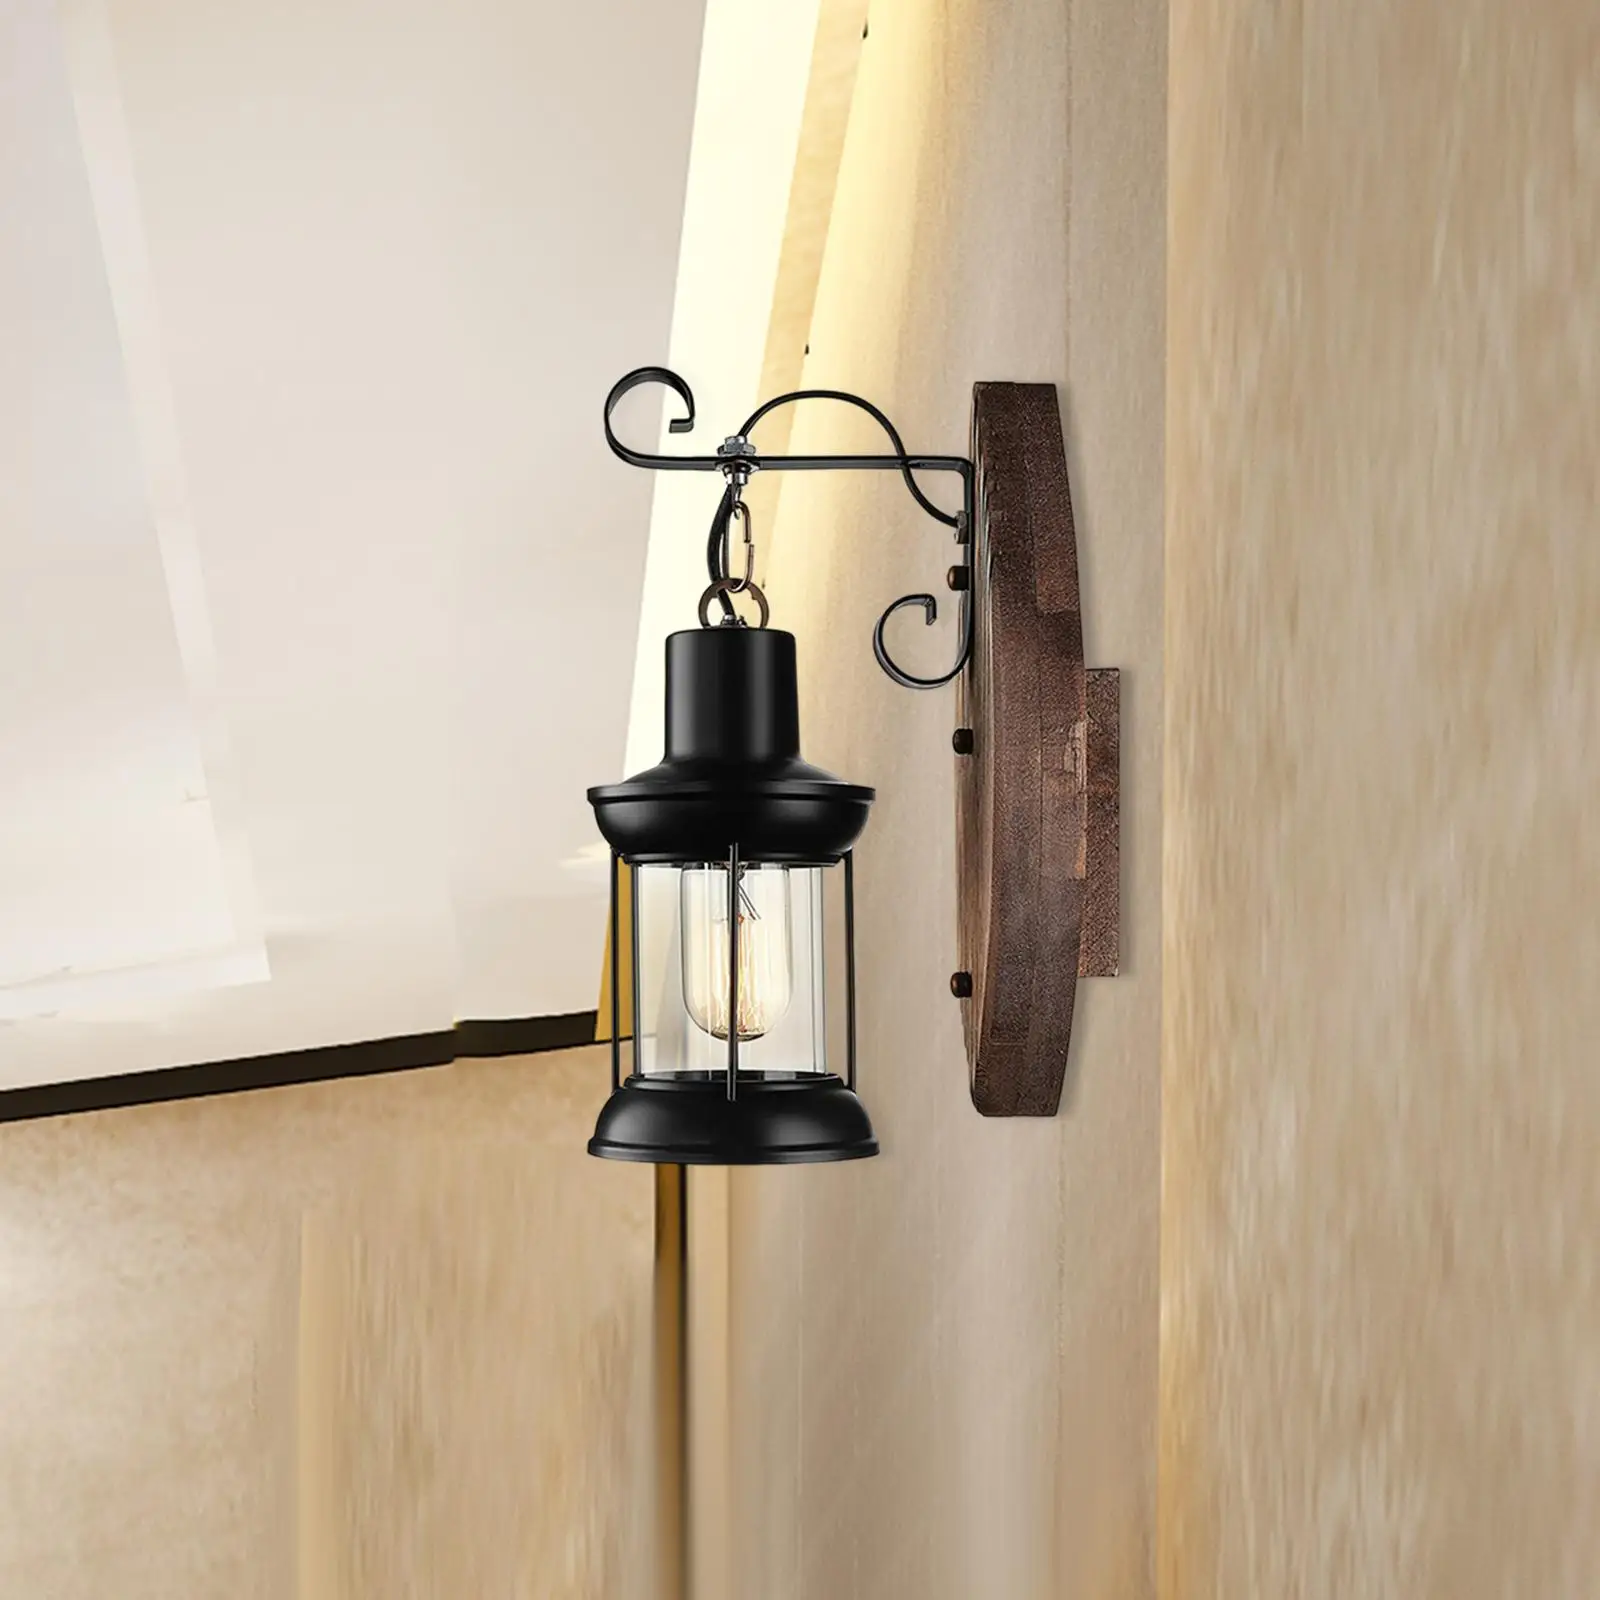 Vintage Style Wall Mount Sconce Lamp Wall Sconce Lighting Creative Pendant E27 for Bedside Kitchen Stairway Home Bedroom